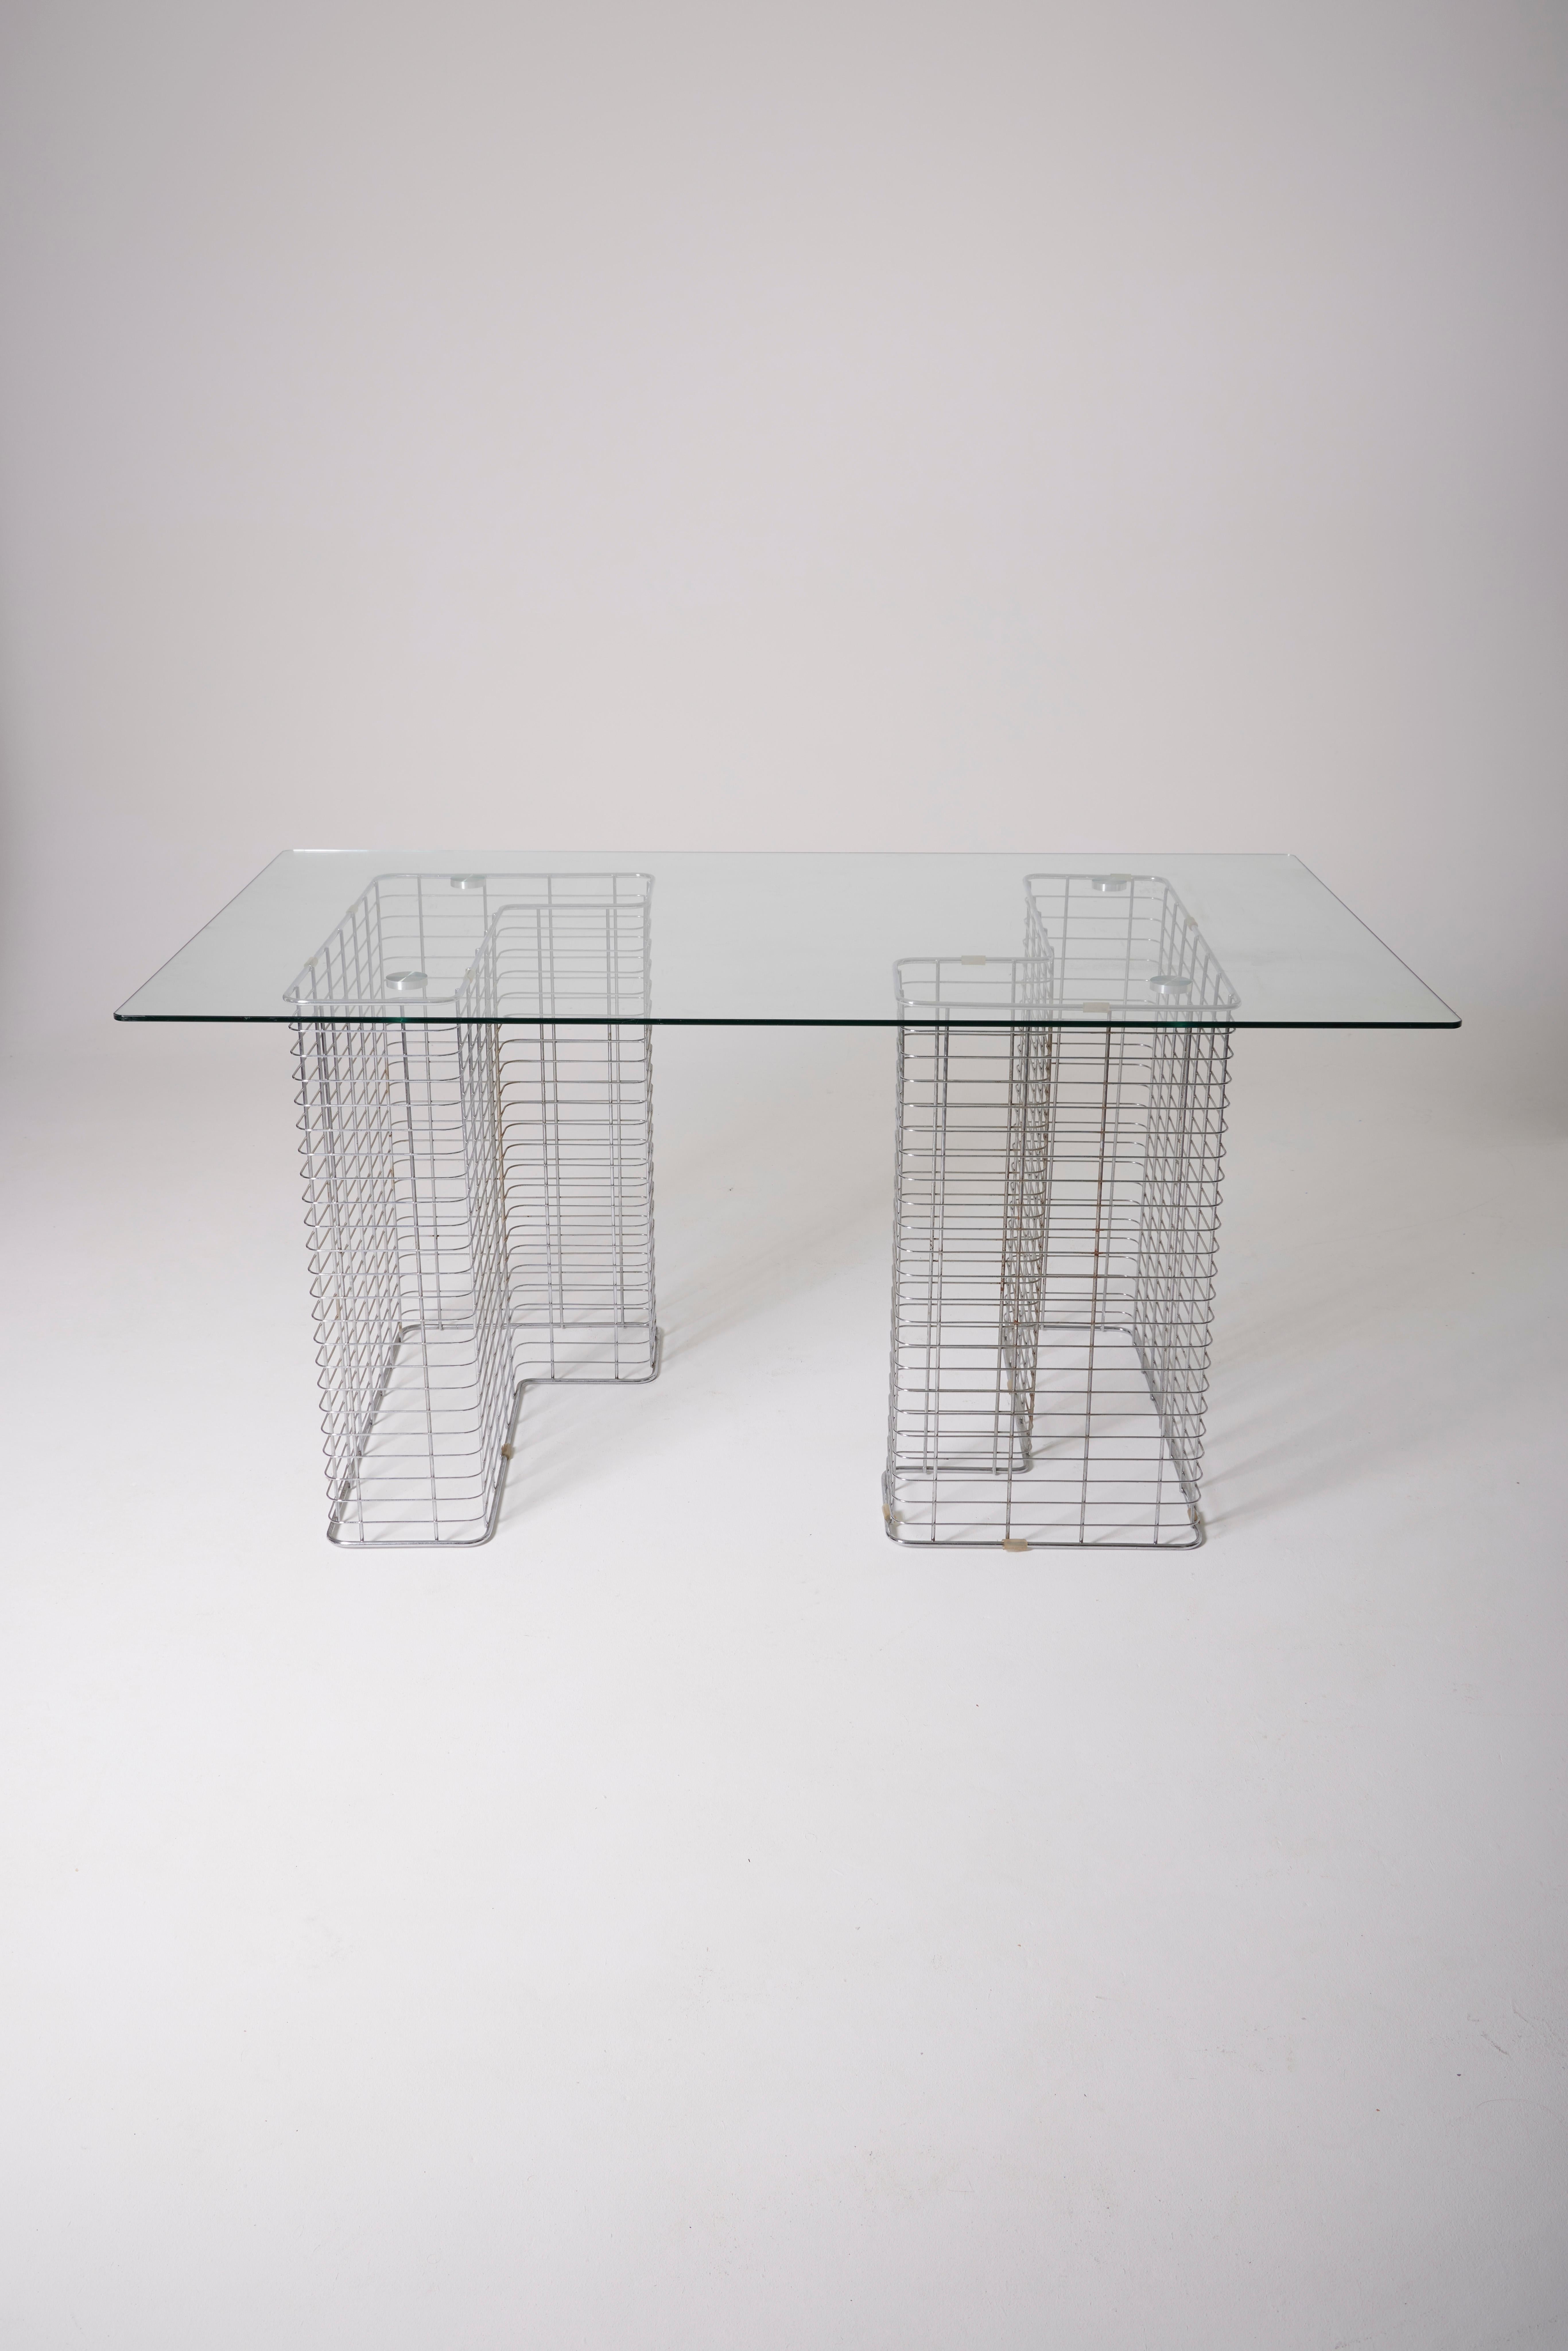 Desk attributed to the designer Terence Conran, from the 1980s. The tabletop is made of glass, and the base consists of two brushed metal L-shaped elements. In perfect condition.
LP1767.